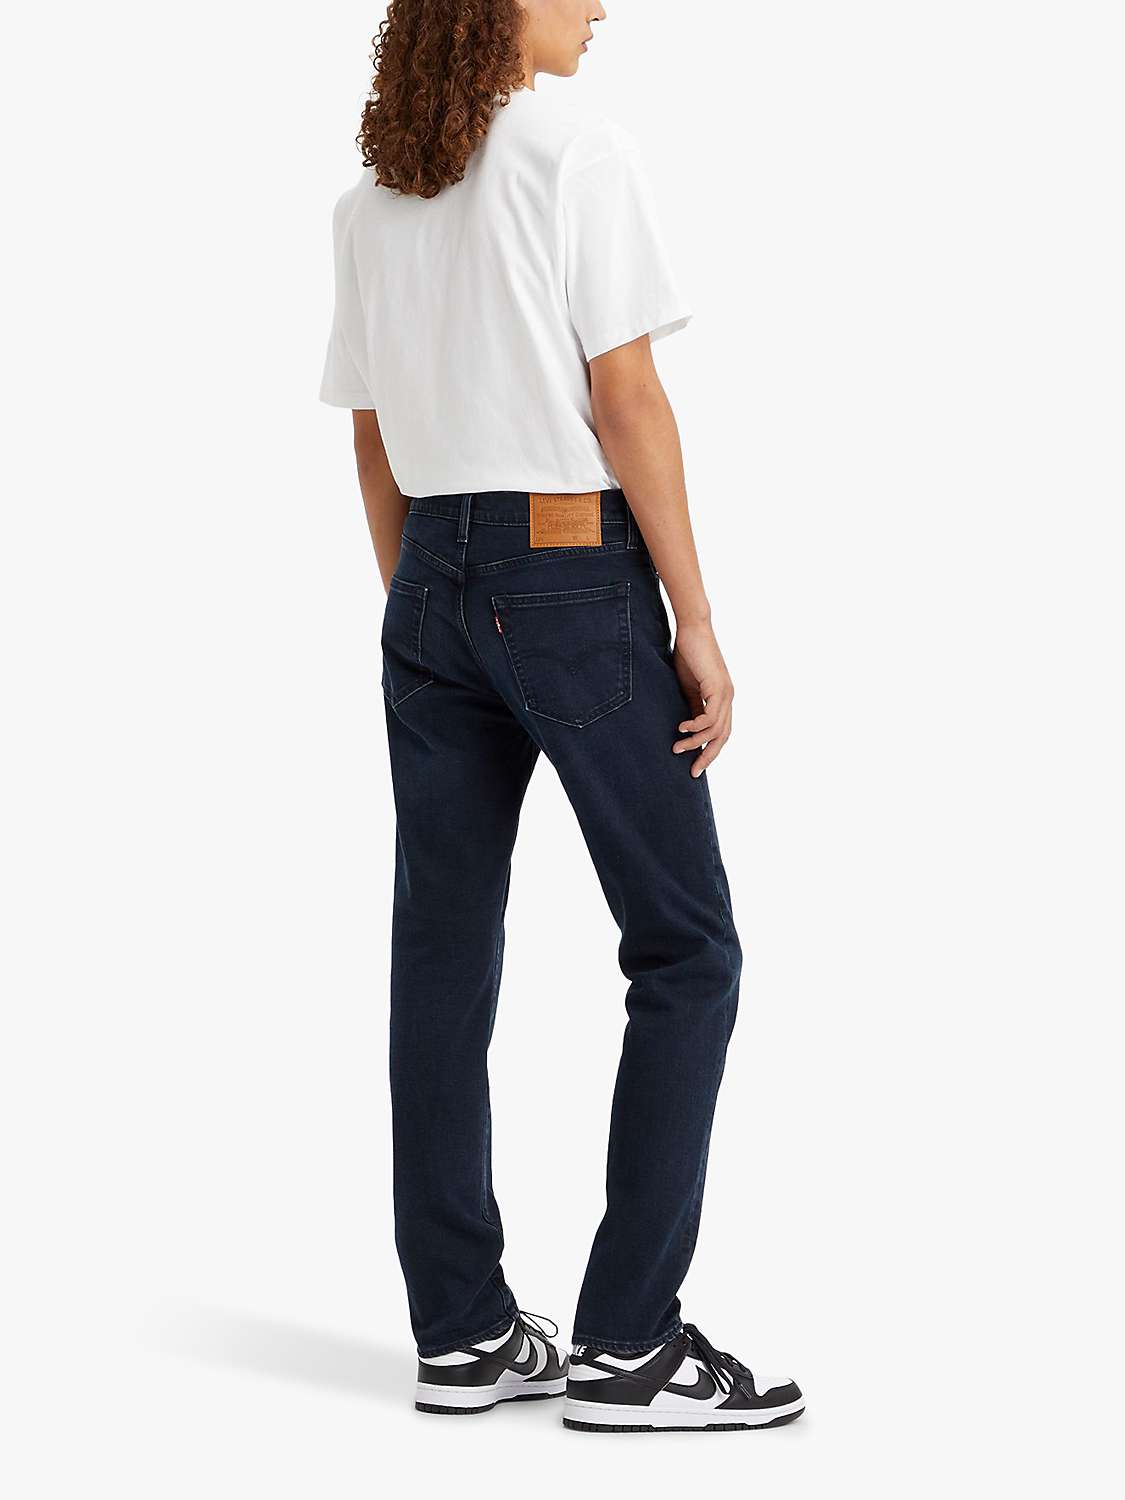 Buy Levi's 511 Slim Jeans, Chicken Of The Woods Online at johnlewis.com